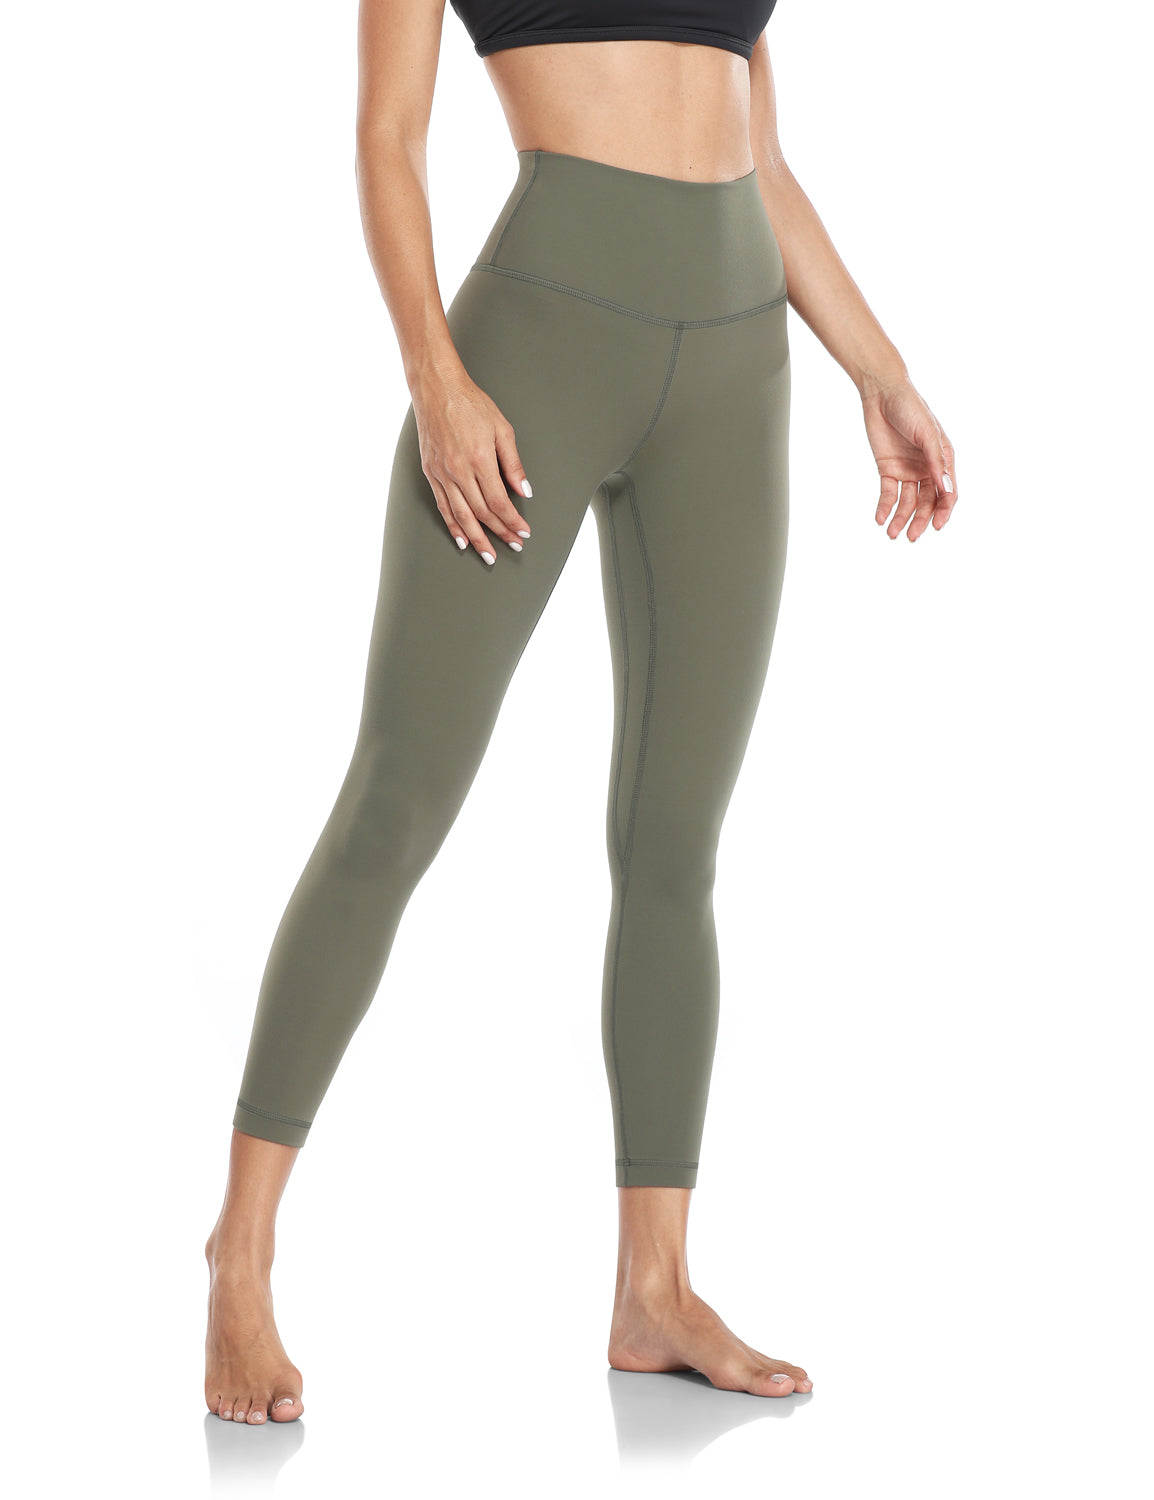 HeyNuts Essential 7/8 Leggings High Waisted Yoga Pants for Women, Buttery  Soft Workout Pants Compression Leggings with Inner Pockets Everglade  Teal_25'' XS(0/2), Everglade Teal, XS: Buy Online at Best Price in UAE 